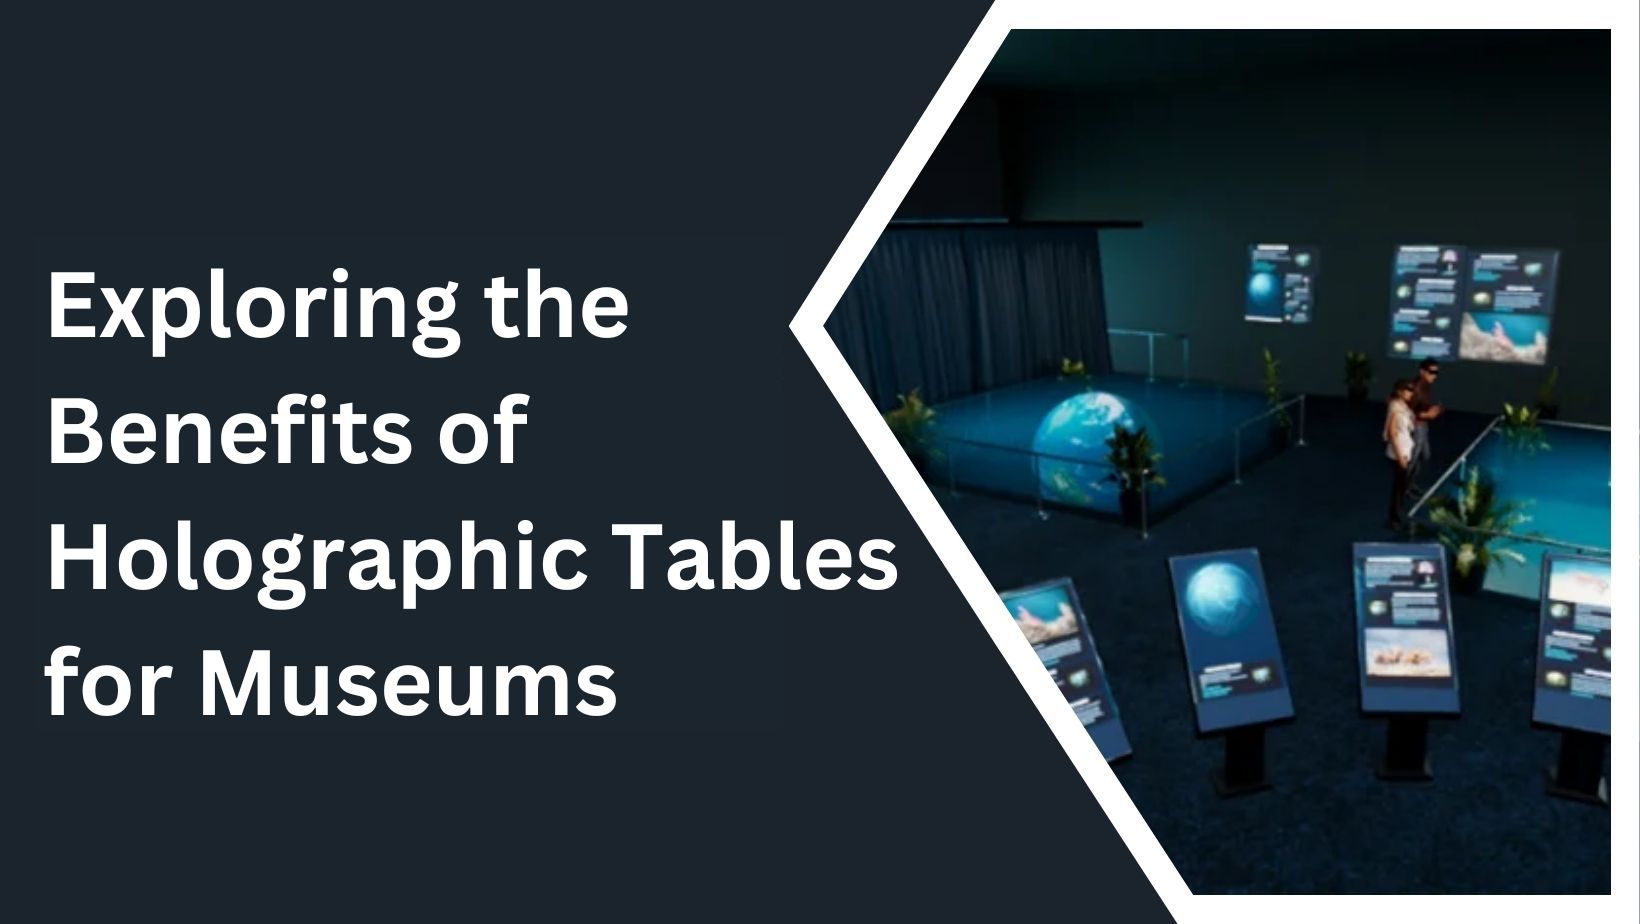 Holographic Tables for Museums